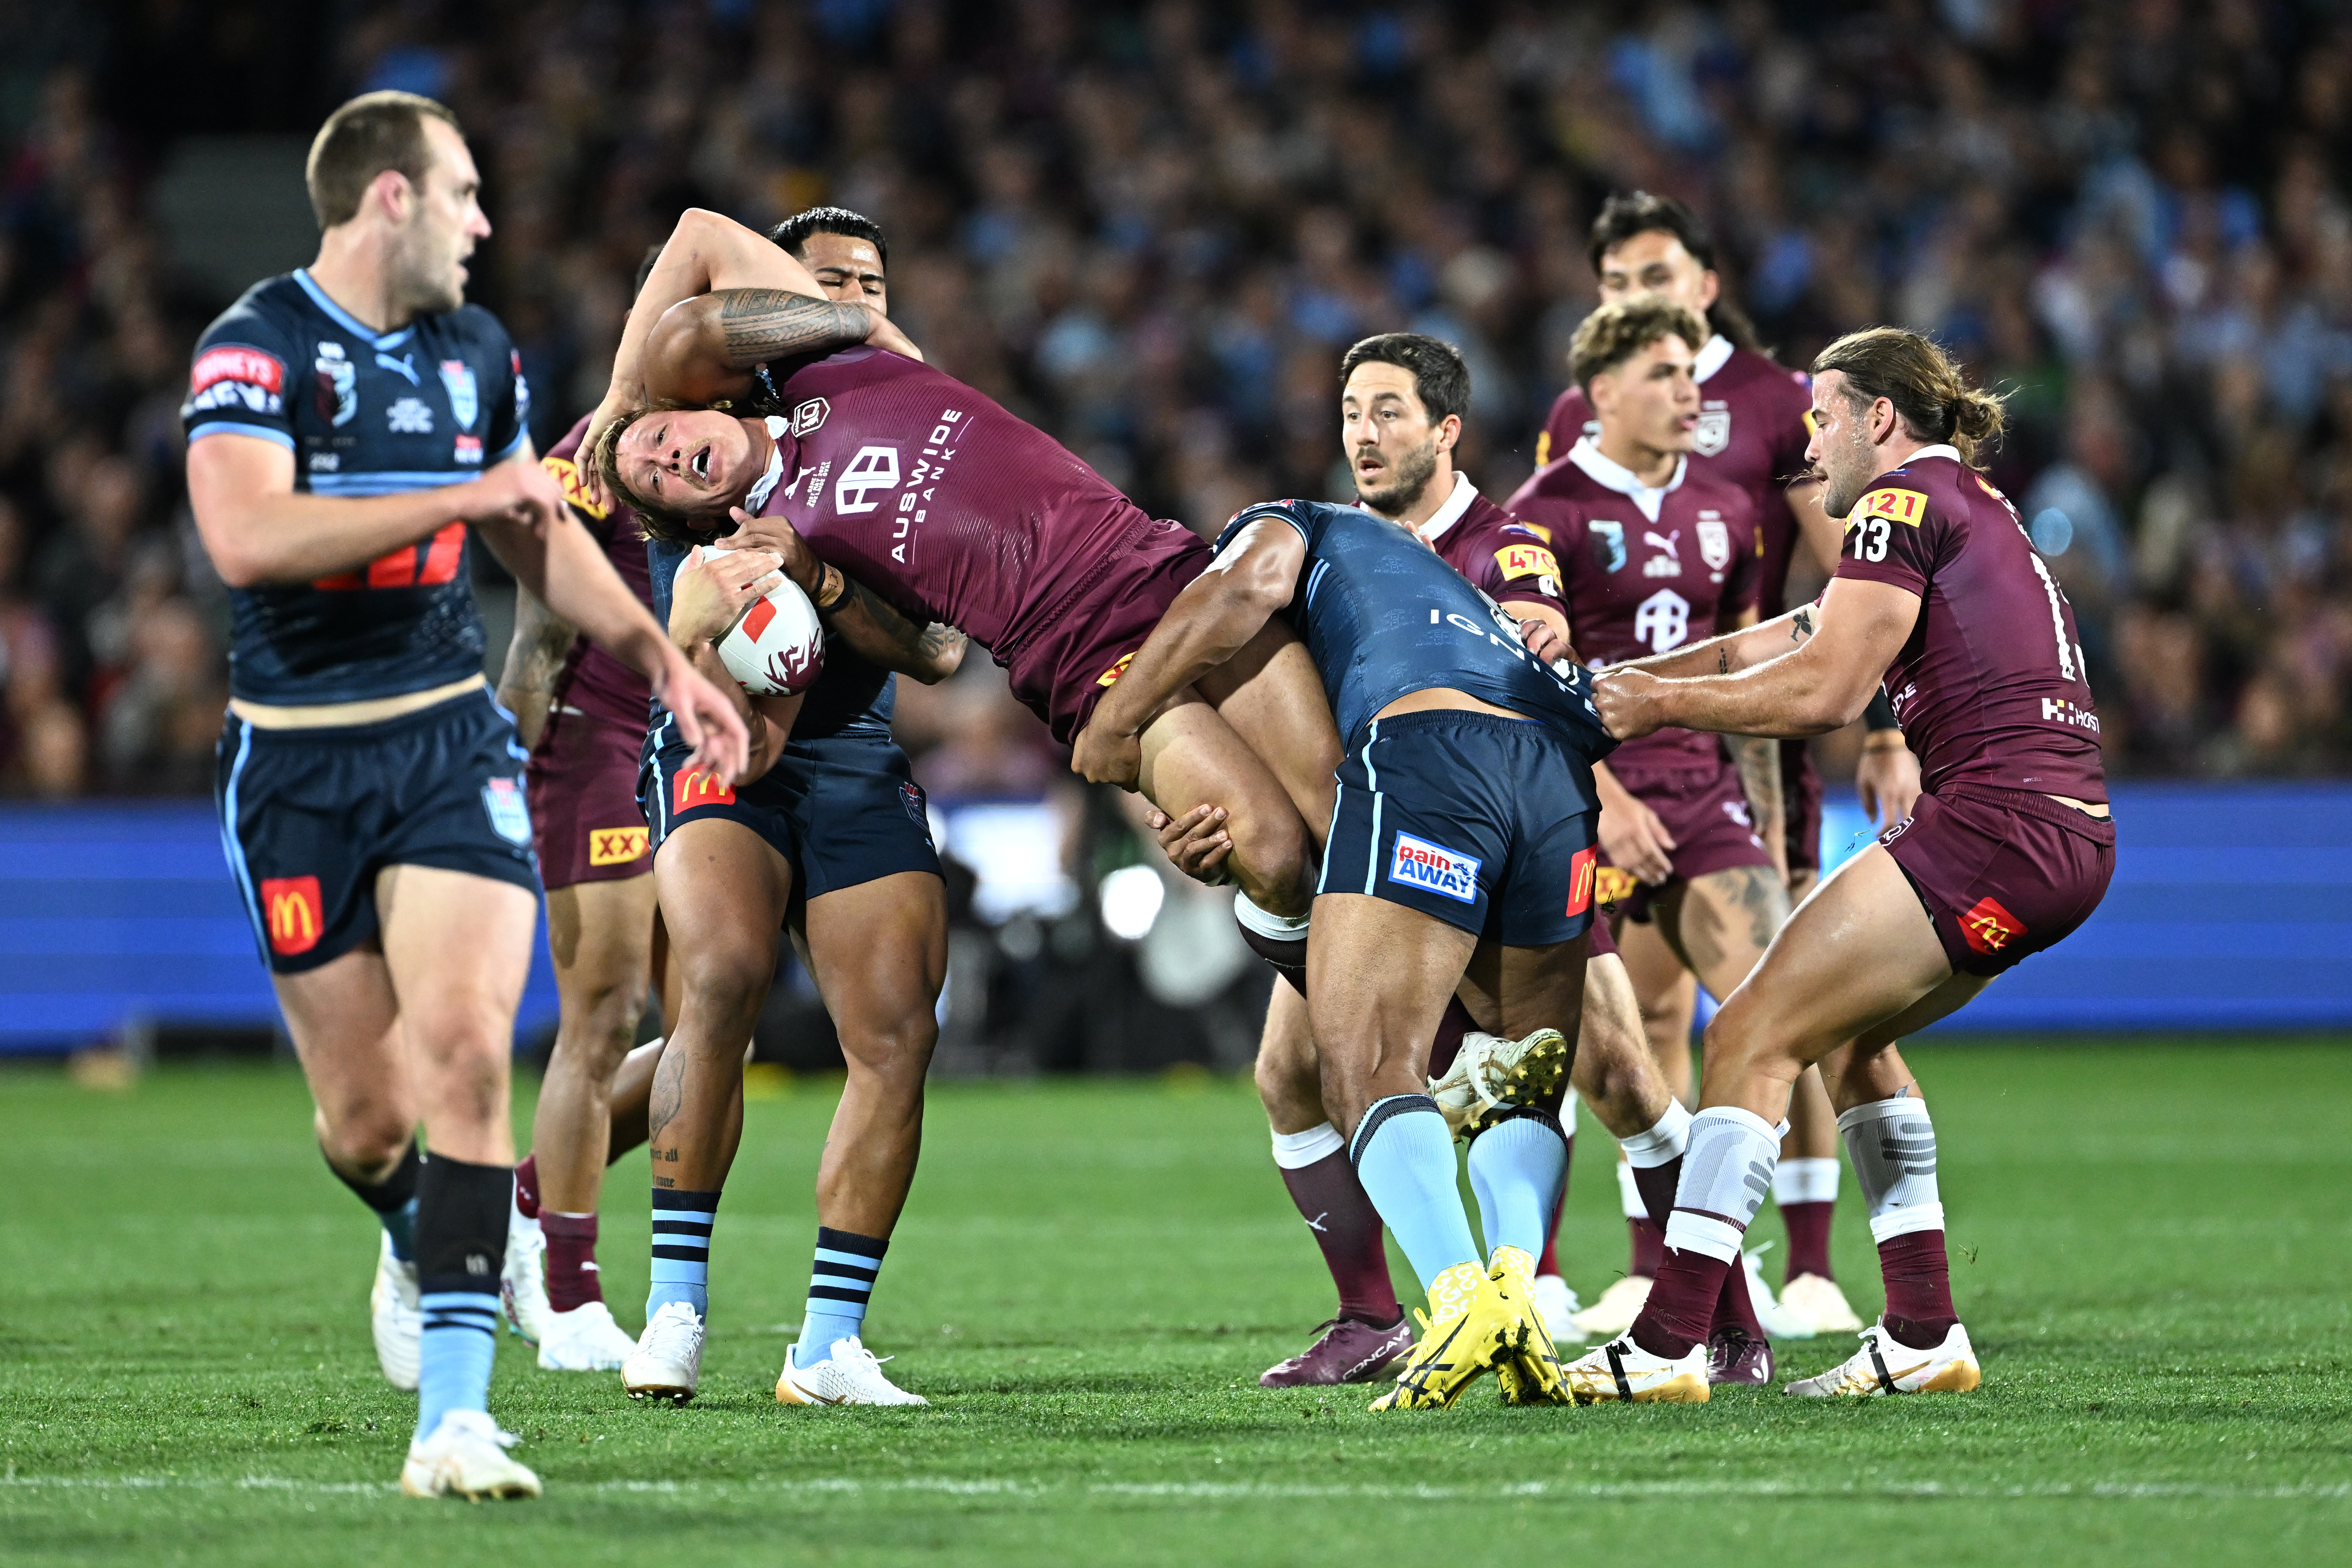 Queensland Maroons defeat NSW Blues 26-18 in State of Origin I at